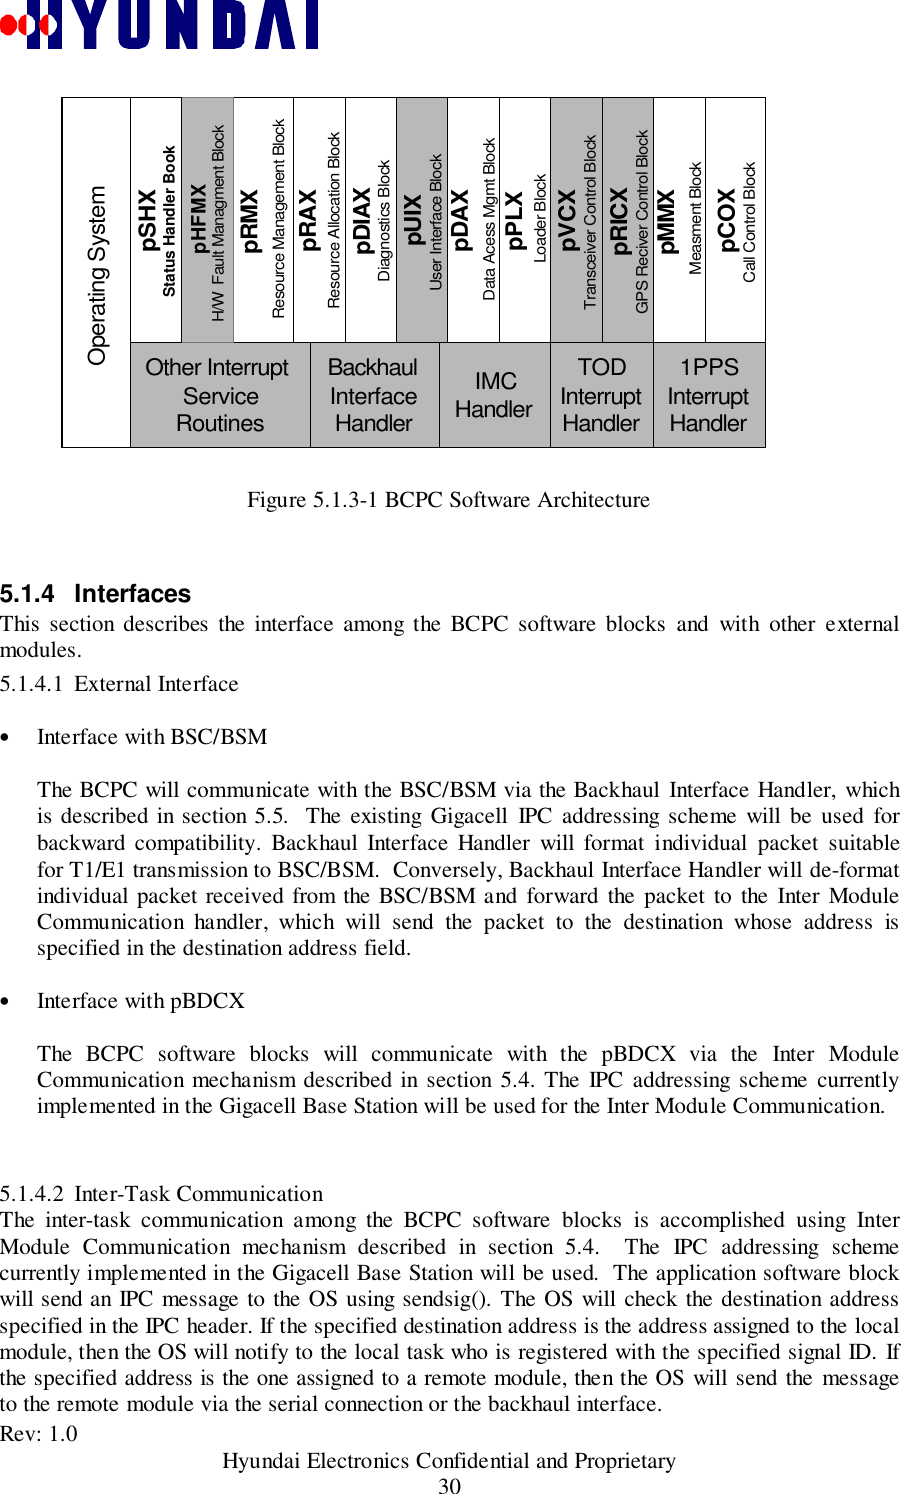 Rev: 1.0                                           Hyundai Electronics Confidential and Proprietary30pRMX Resource Management BlockOperating SystempCOXCall Control BlockpUIXUser Interface BlockOther InterruptServiceRoutinesIMCHandlerpHFMXH/W  Fault Managment BlockpRAX Resource Allocation BlockpDIAXDiagnostics BlockpDAX Data Acess Mgmt BlockpPLX Loader BlockpVCXTransceiver Control BlockBackhaulInterfaceHandlerTODInterruptHandler1PPSInterruptHandlerpRICXGPS Reciver Control BlockpMMX Measment BlockpSHXStatus Handler BookFigure 5.1.3-1 BCPC Software Architecture5.1.4 InterfacesThis section describes the interface among the BCPC software blocks and with other externalmodules.5.1.4.1 External Interface• Interface with BSC/BSMThe BCPC will communicate with the BSC/BSM via the Backhaul Interface Handler, whichis described in section 5.5.  The existing Gigacell IPC addressing scheme will be used forbackward compatibility. Backhaul Interface Handler will format individual packet suitablefor T1/E1 transmission to BSC/BSM.  Conversely, Backhaul Interface Handler will de-formatindividual packet received from the BSC/BSM and forward the packet to the Inter ModuleCommunication handler, which will send the packet to the destination whose address isspecified in the destination address field.• Interface with pBDCXThe BCPC software blocks will communicate with the pBDCX via the Inter ModuleCommunication mechanism described in section 5.4. The IPC addressing scheme currentlyimplemented in the Gigacell Base Station will be used for the Inter Module Communication.5.1.4.2 Inter-Task CommunicationThe inter-task communication among the BCPC software blocks is accomplished using InterModule Communication mechanism described in section 5.4.  The IPC addressing schemecurrently implemented in the Gigacell Base Station will be used.  The application software blockwill send an IPC message to the OS using sendsig(). The OS will check the destination addressspecified in the IPC header. If the specified destination address is the address assigned to the localmodule, then the OS will notify to the local task who is registered with the specified signal ID. Ifthe specified address is the one assigned to a remote module, then the OS will send the messageto the remote module via the serial connection or the backhaul interface.